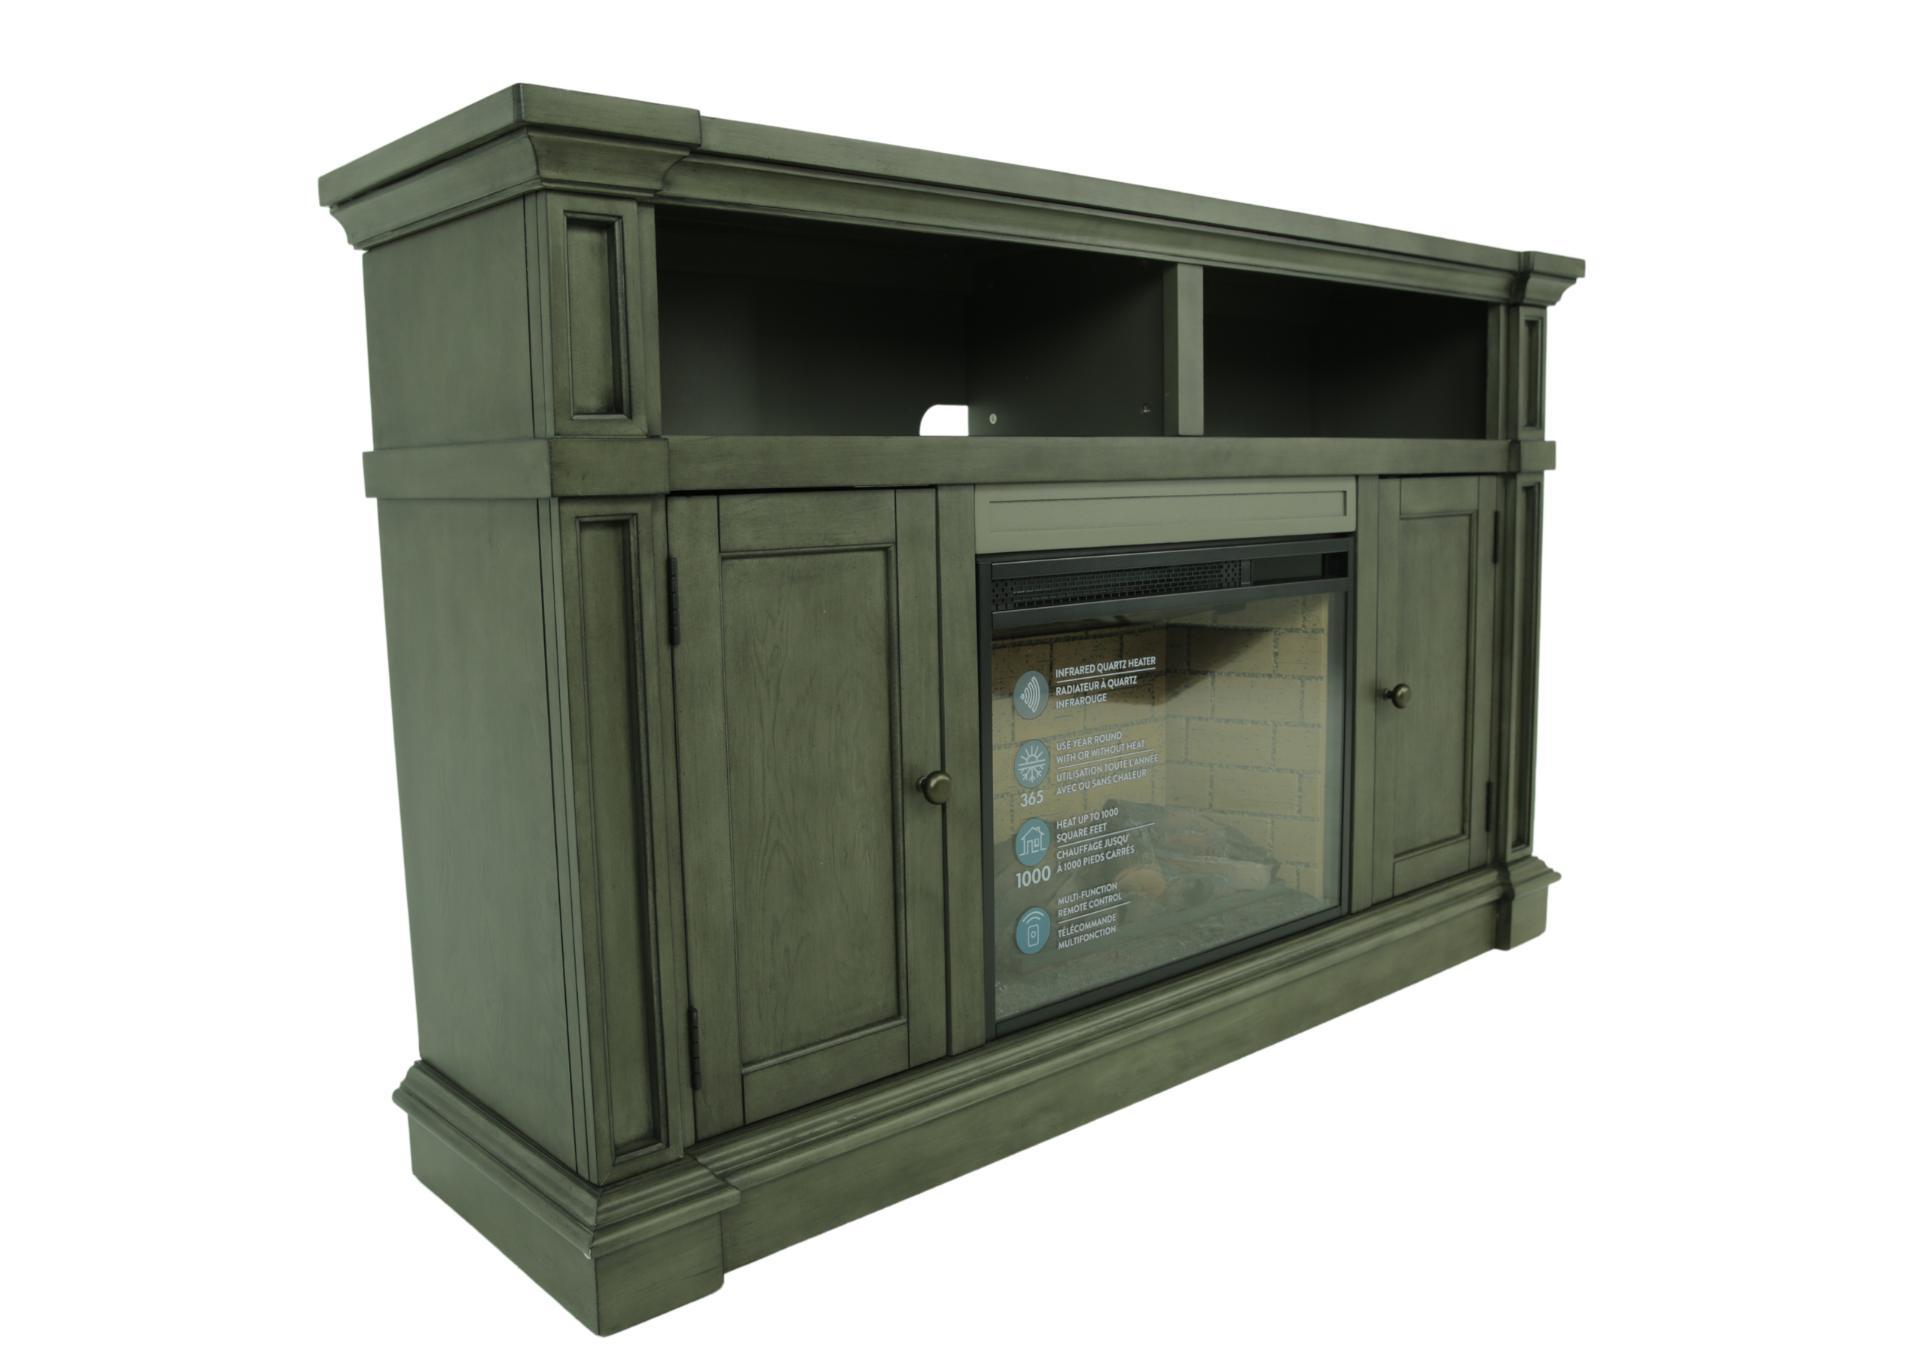 CRAWFORD GRAY FIREPLACE WITH INSERT,KITH FURNITURE